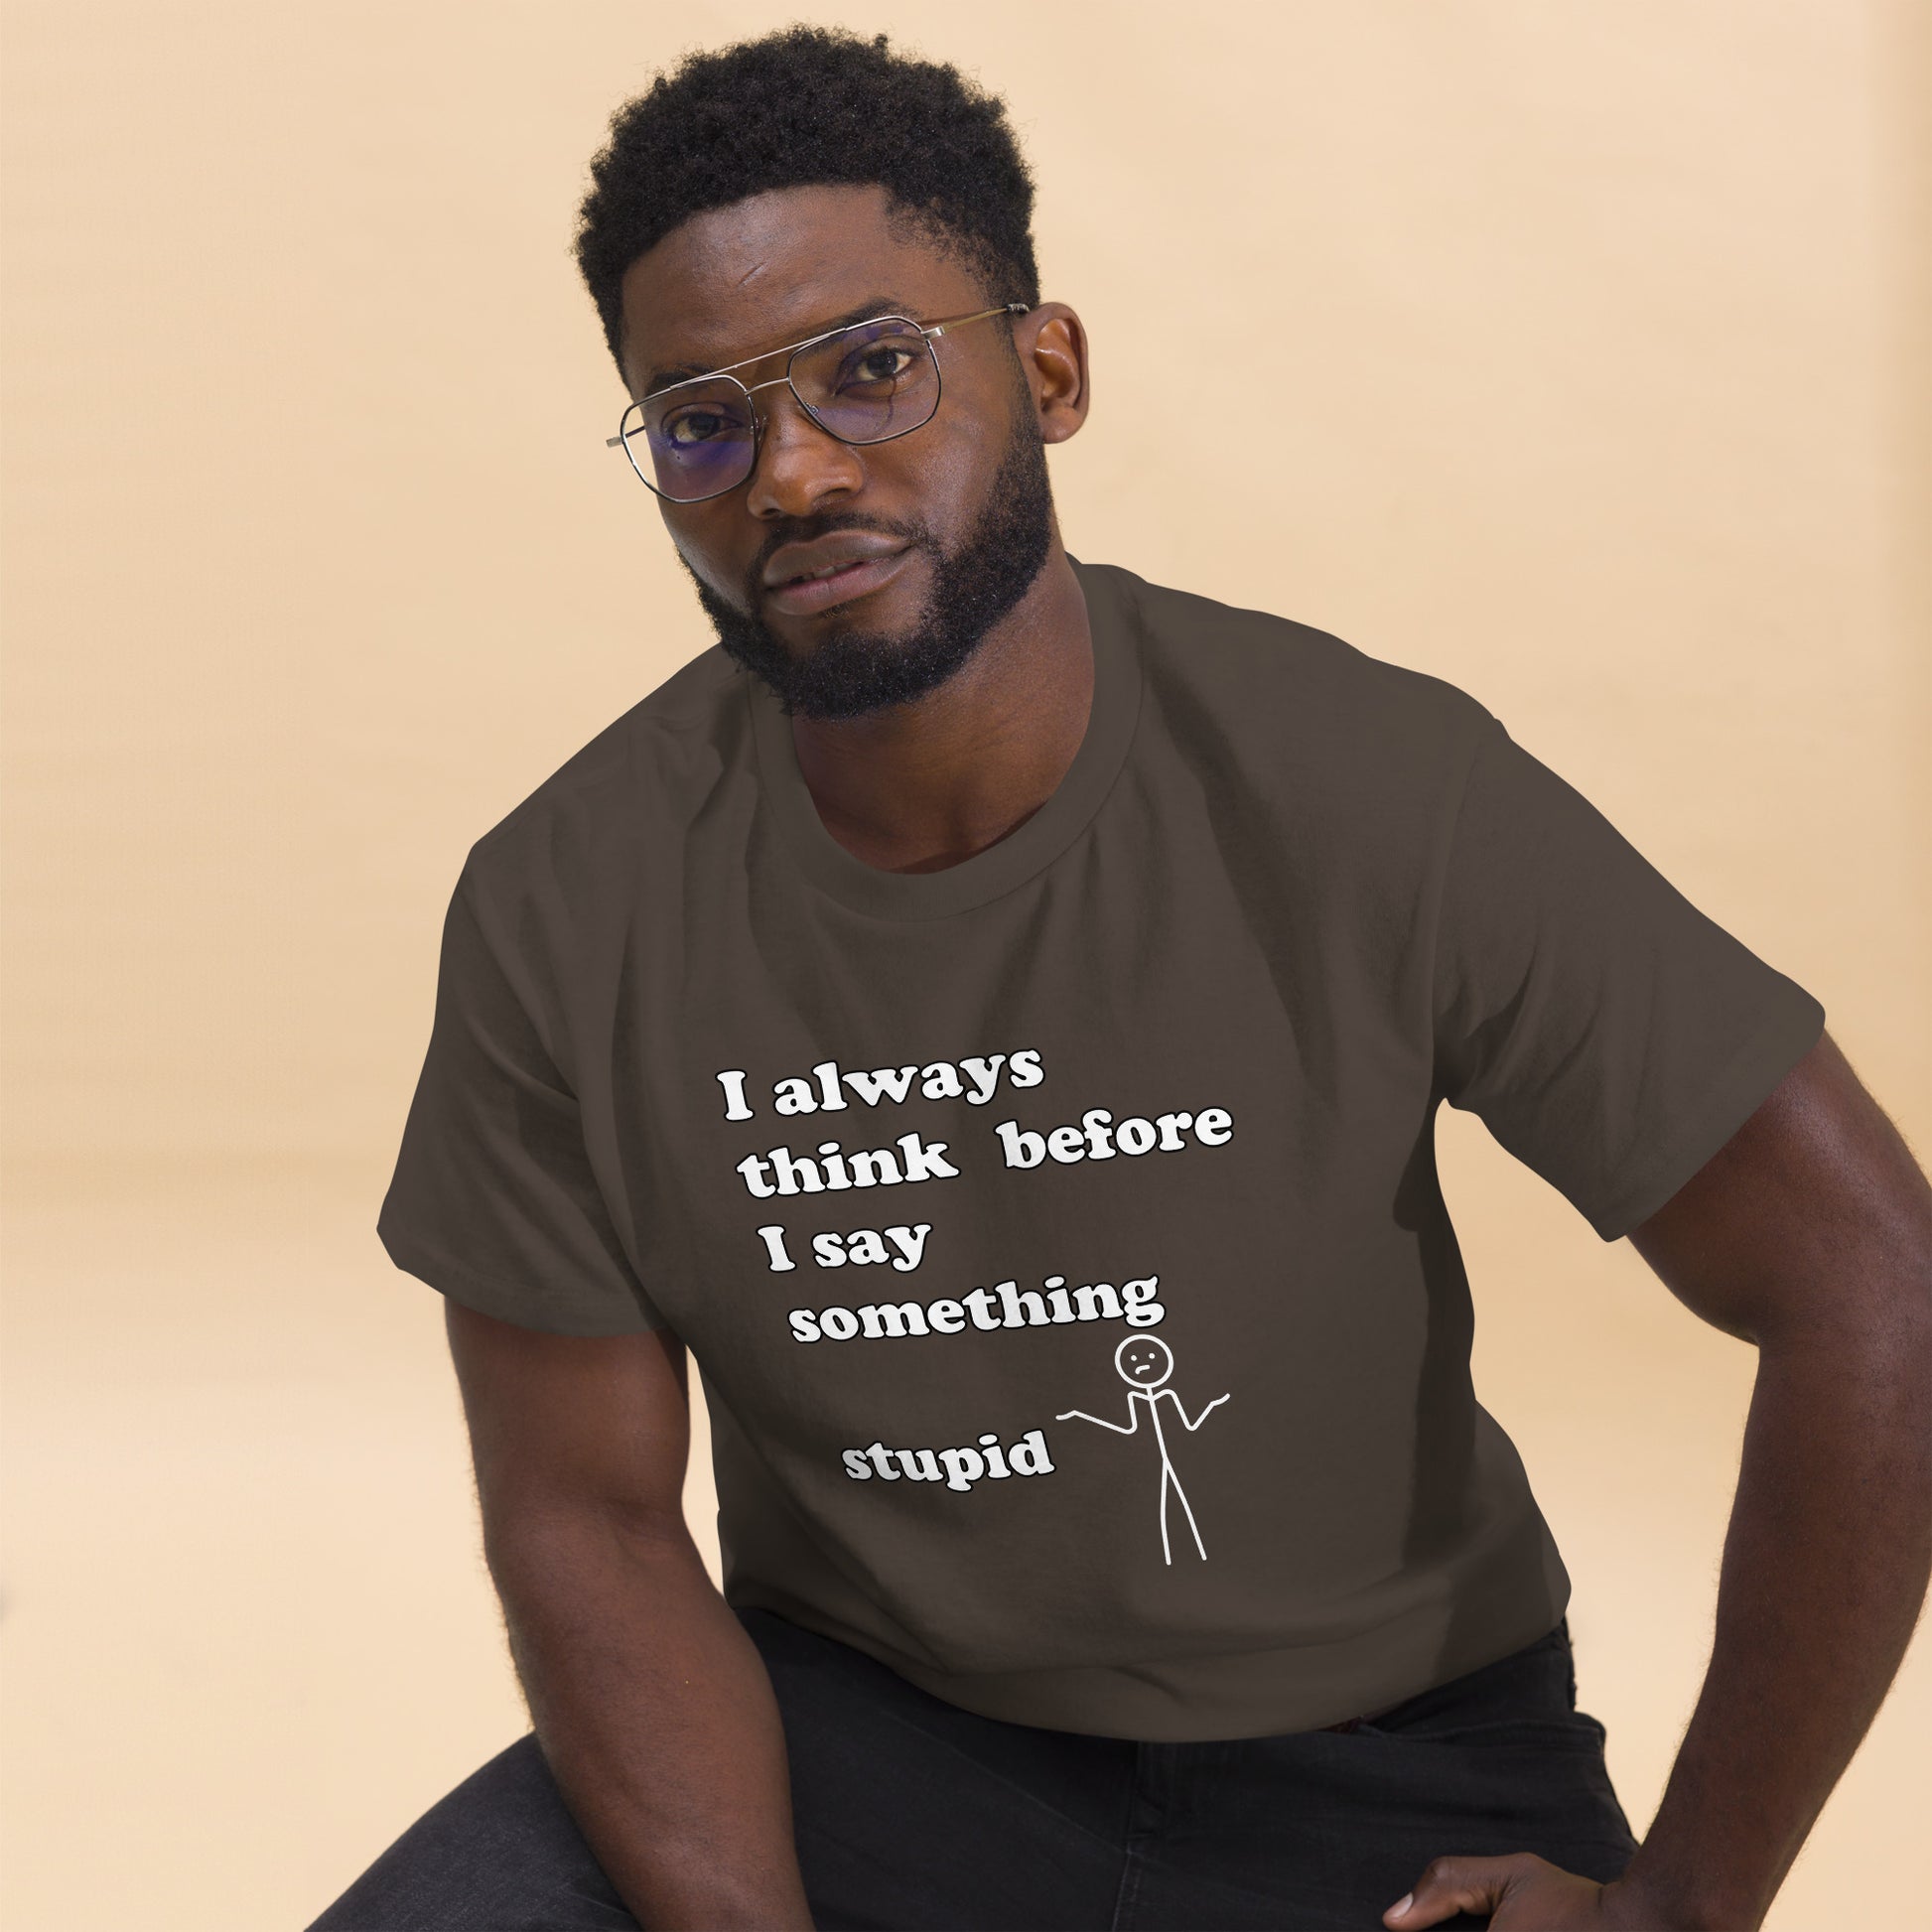 Man with brown t-shirt with text "I always think before I say something stupid"